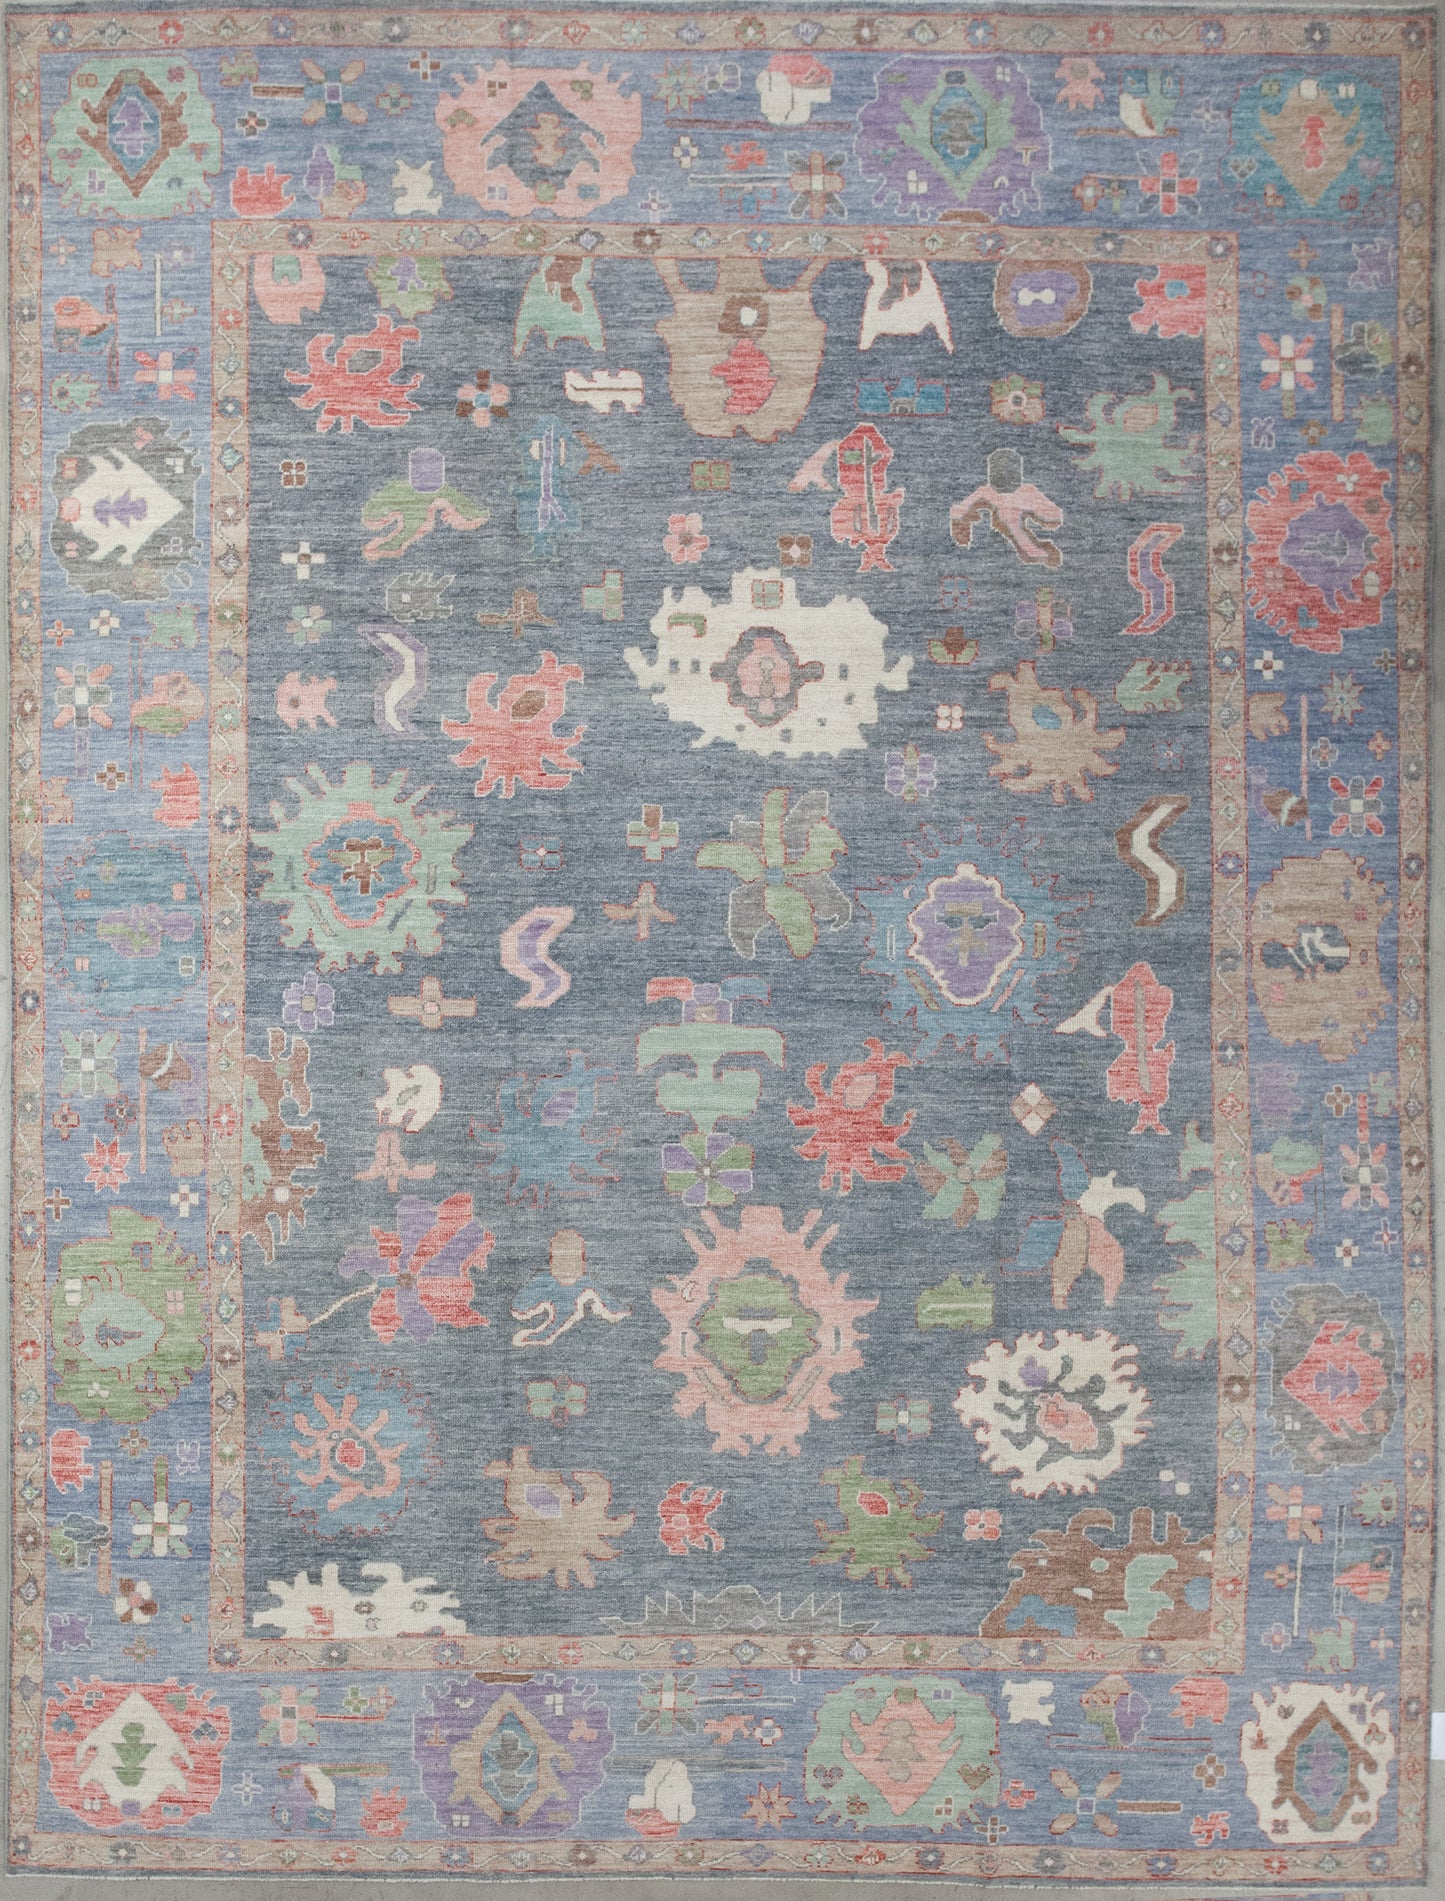 Excellent rug comes with an enjoyable color scheme which has green, blue, beige, and details in orange, white, pink, purple, and brown. The design renders abstract octopuses, marine flora, corals, fishes, and stingrays. 